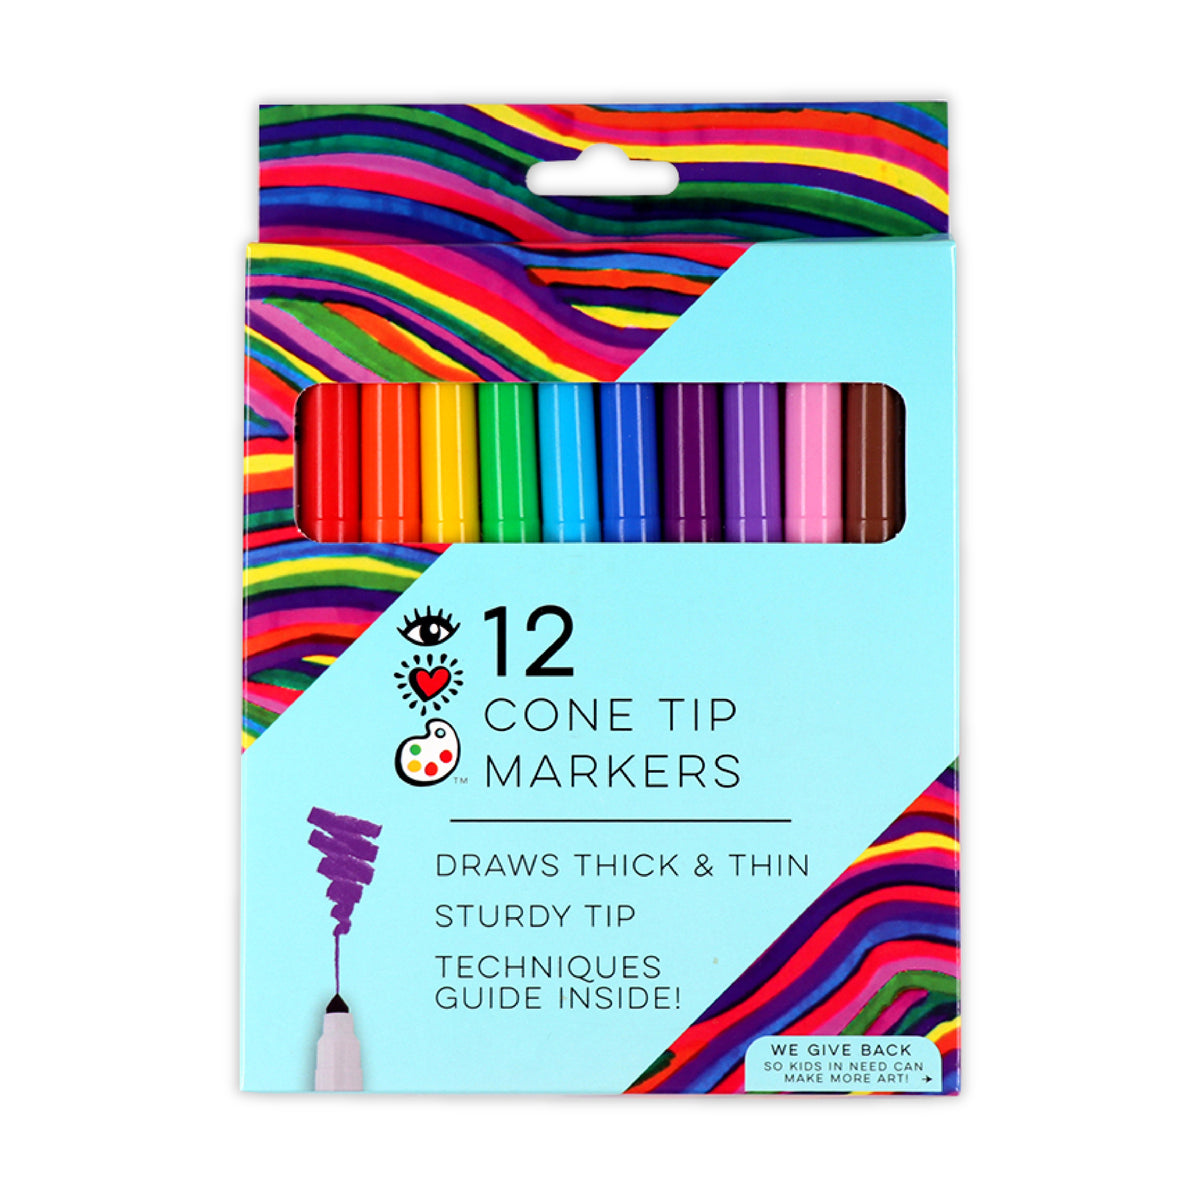 iHeartArt 12 Fabric Markers